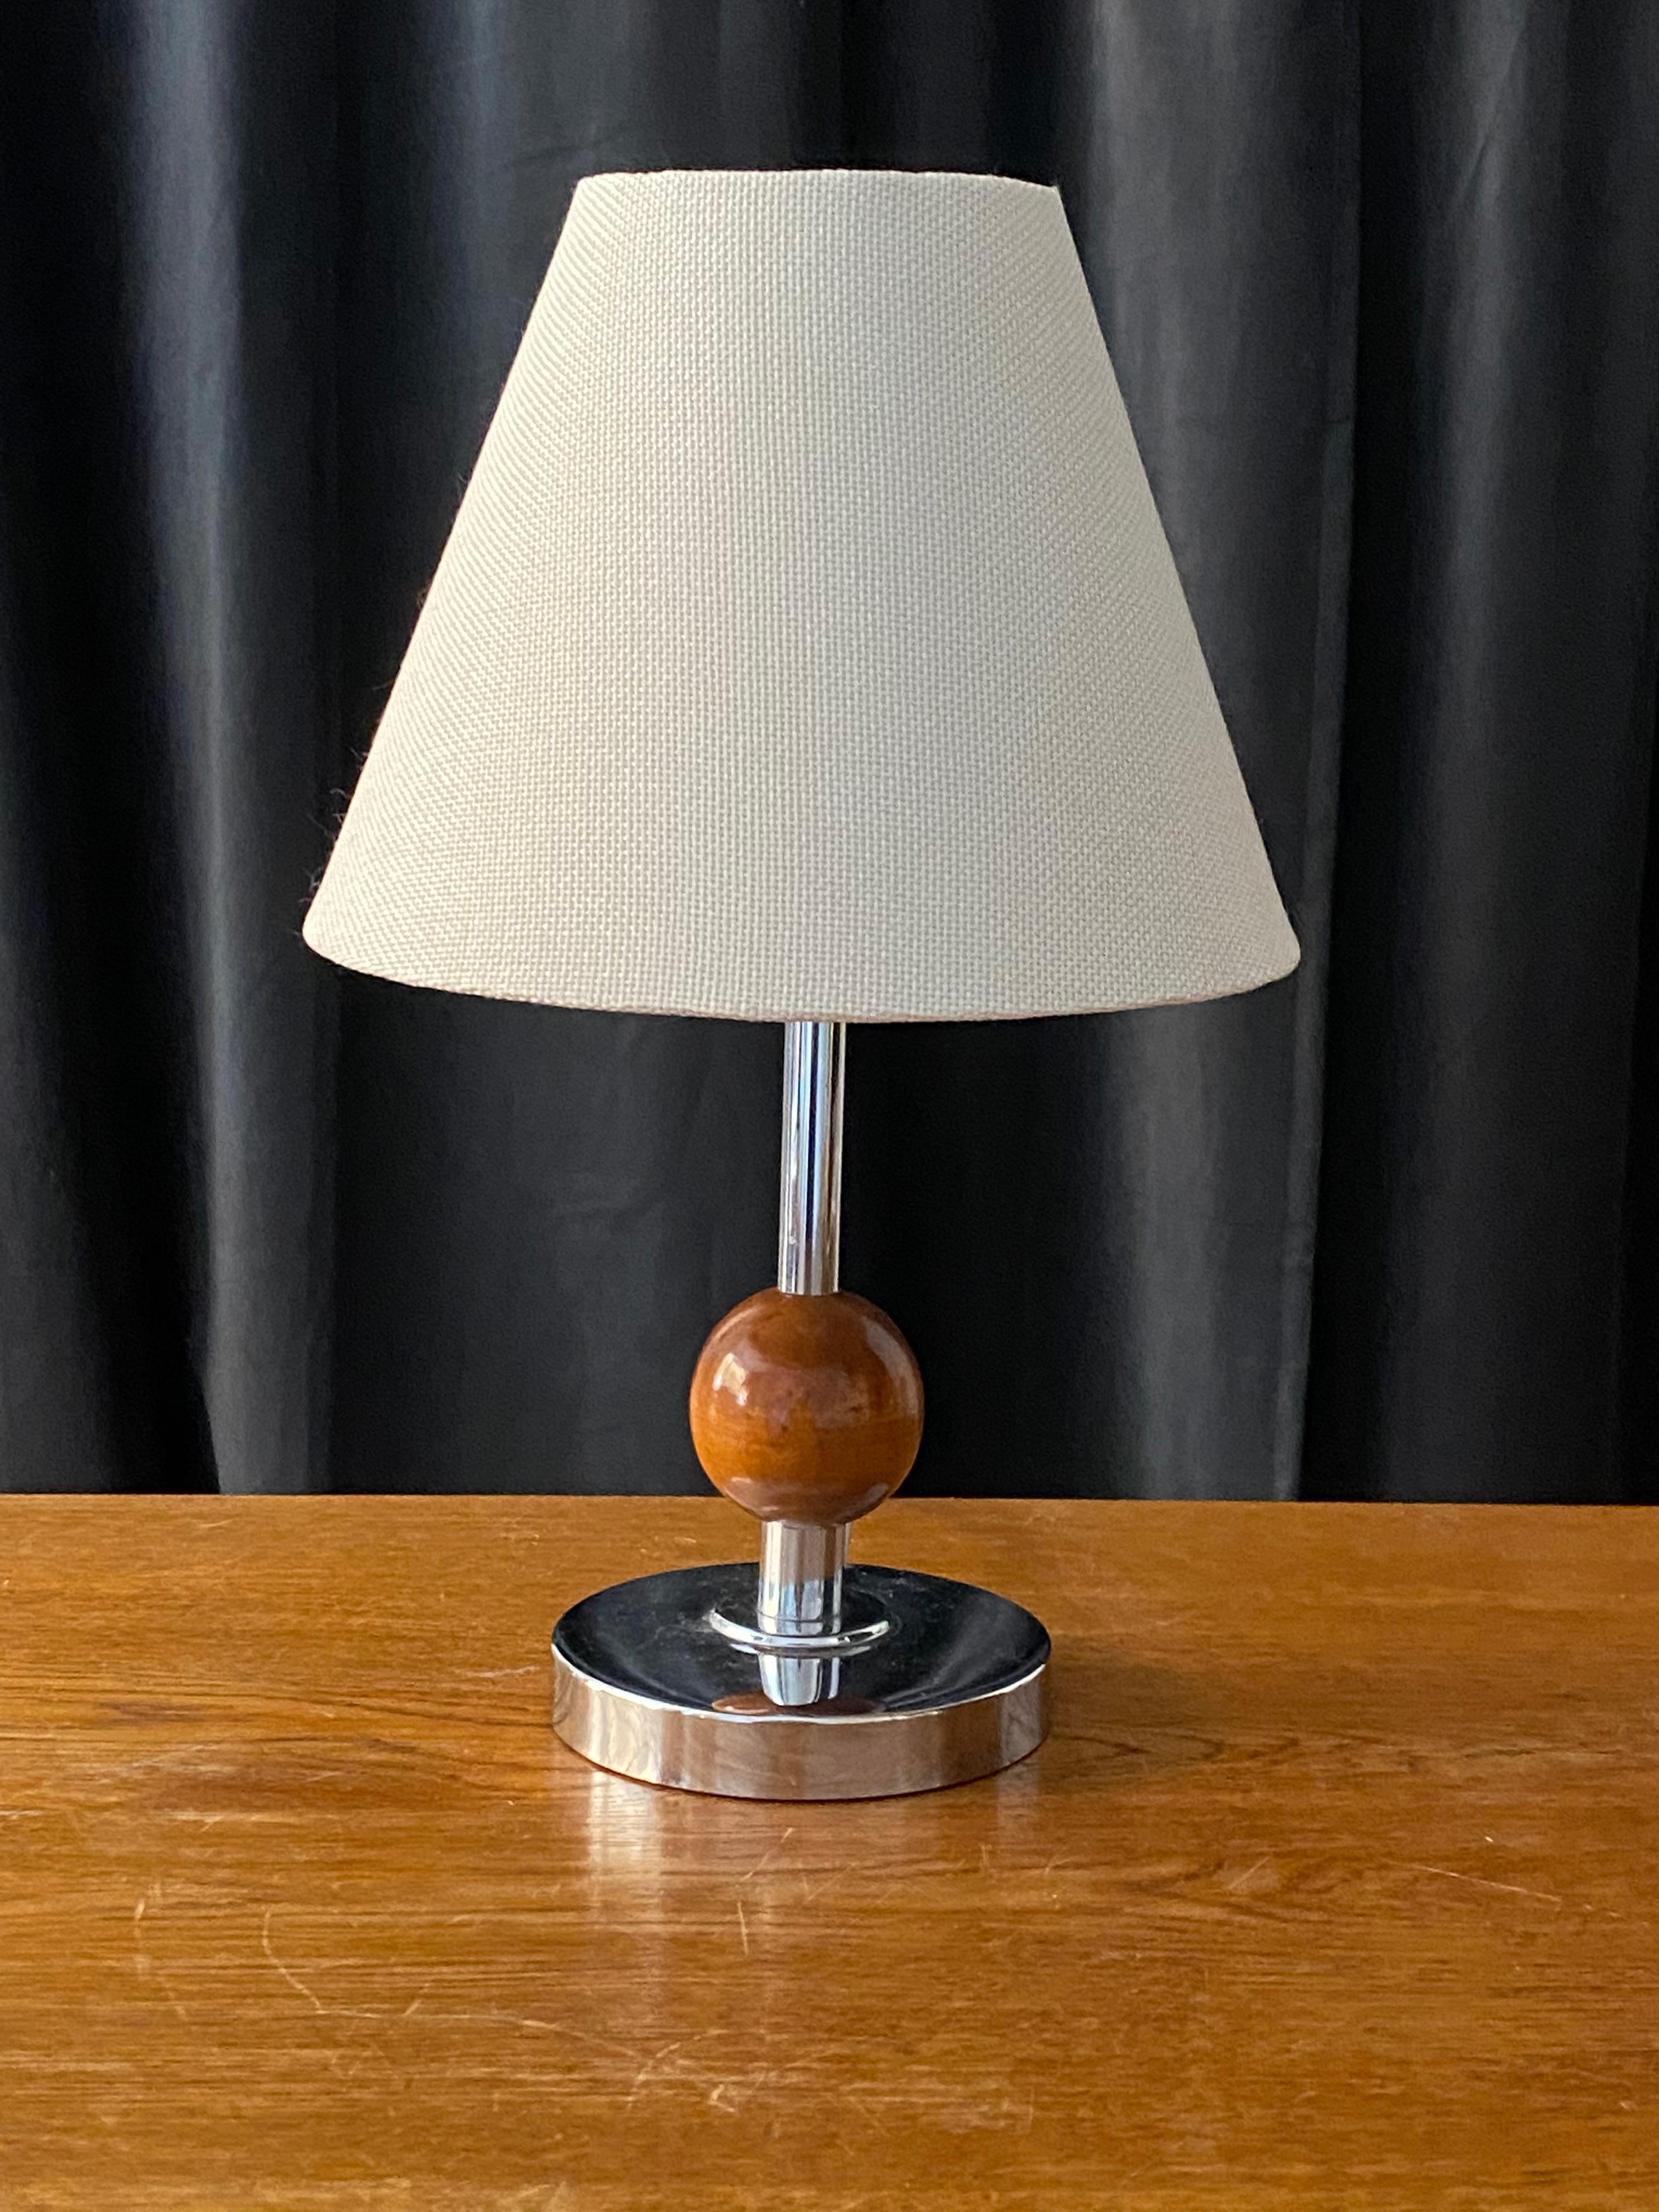 A table lamp, designed and produced in Sweden, 1930s. With lively original patina. Sold excluding Lampshade that is mounted on bulb-clip. Stated measurements are excluding lampshade and lightbulb.

Other designers of the period include Josef